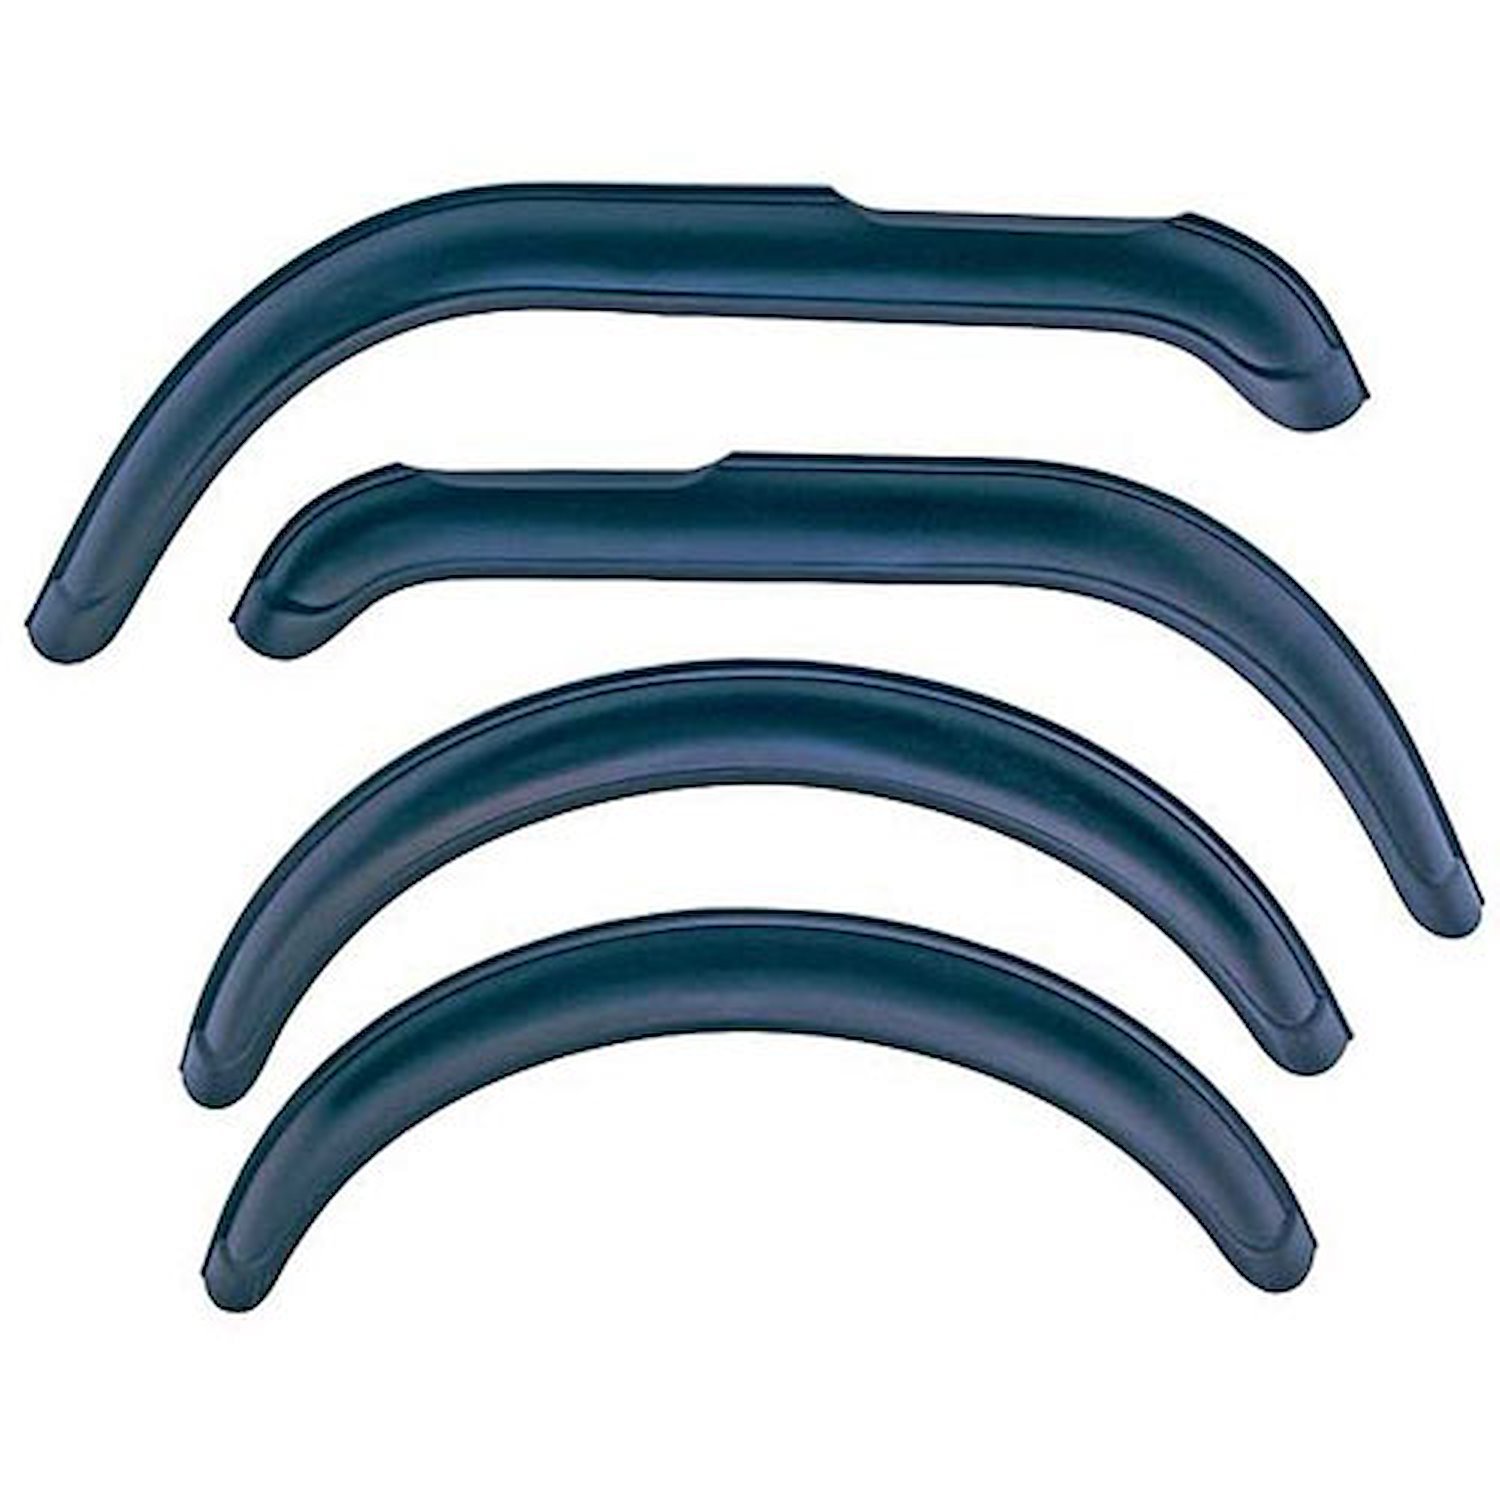 OE Style Fender Flare Kit for Select 1955-86